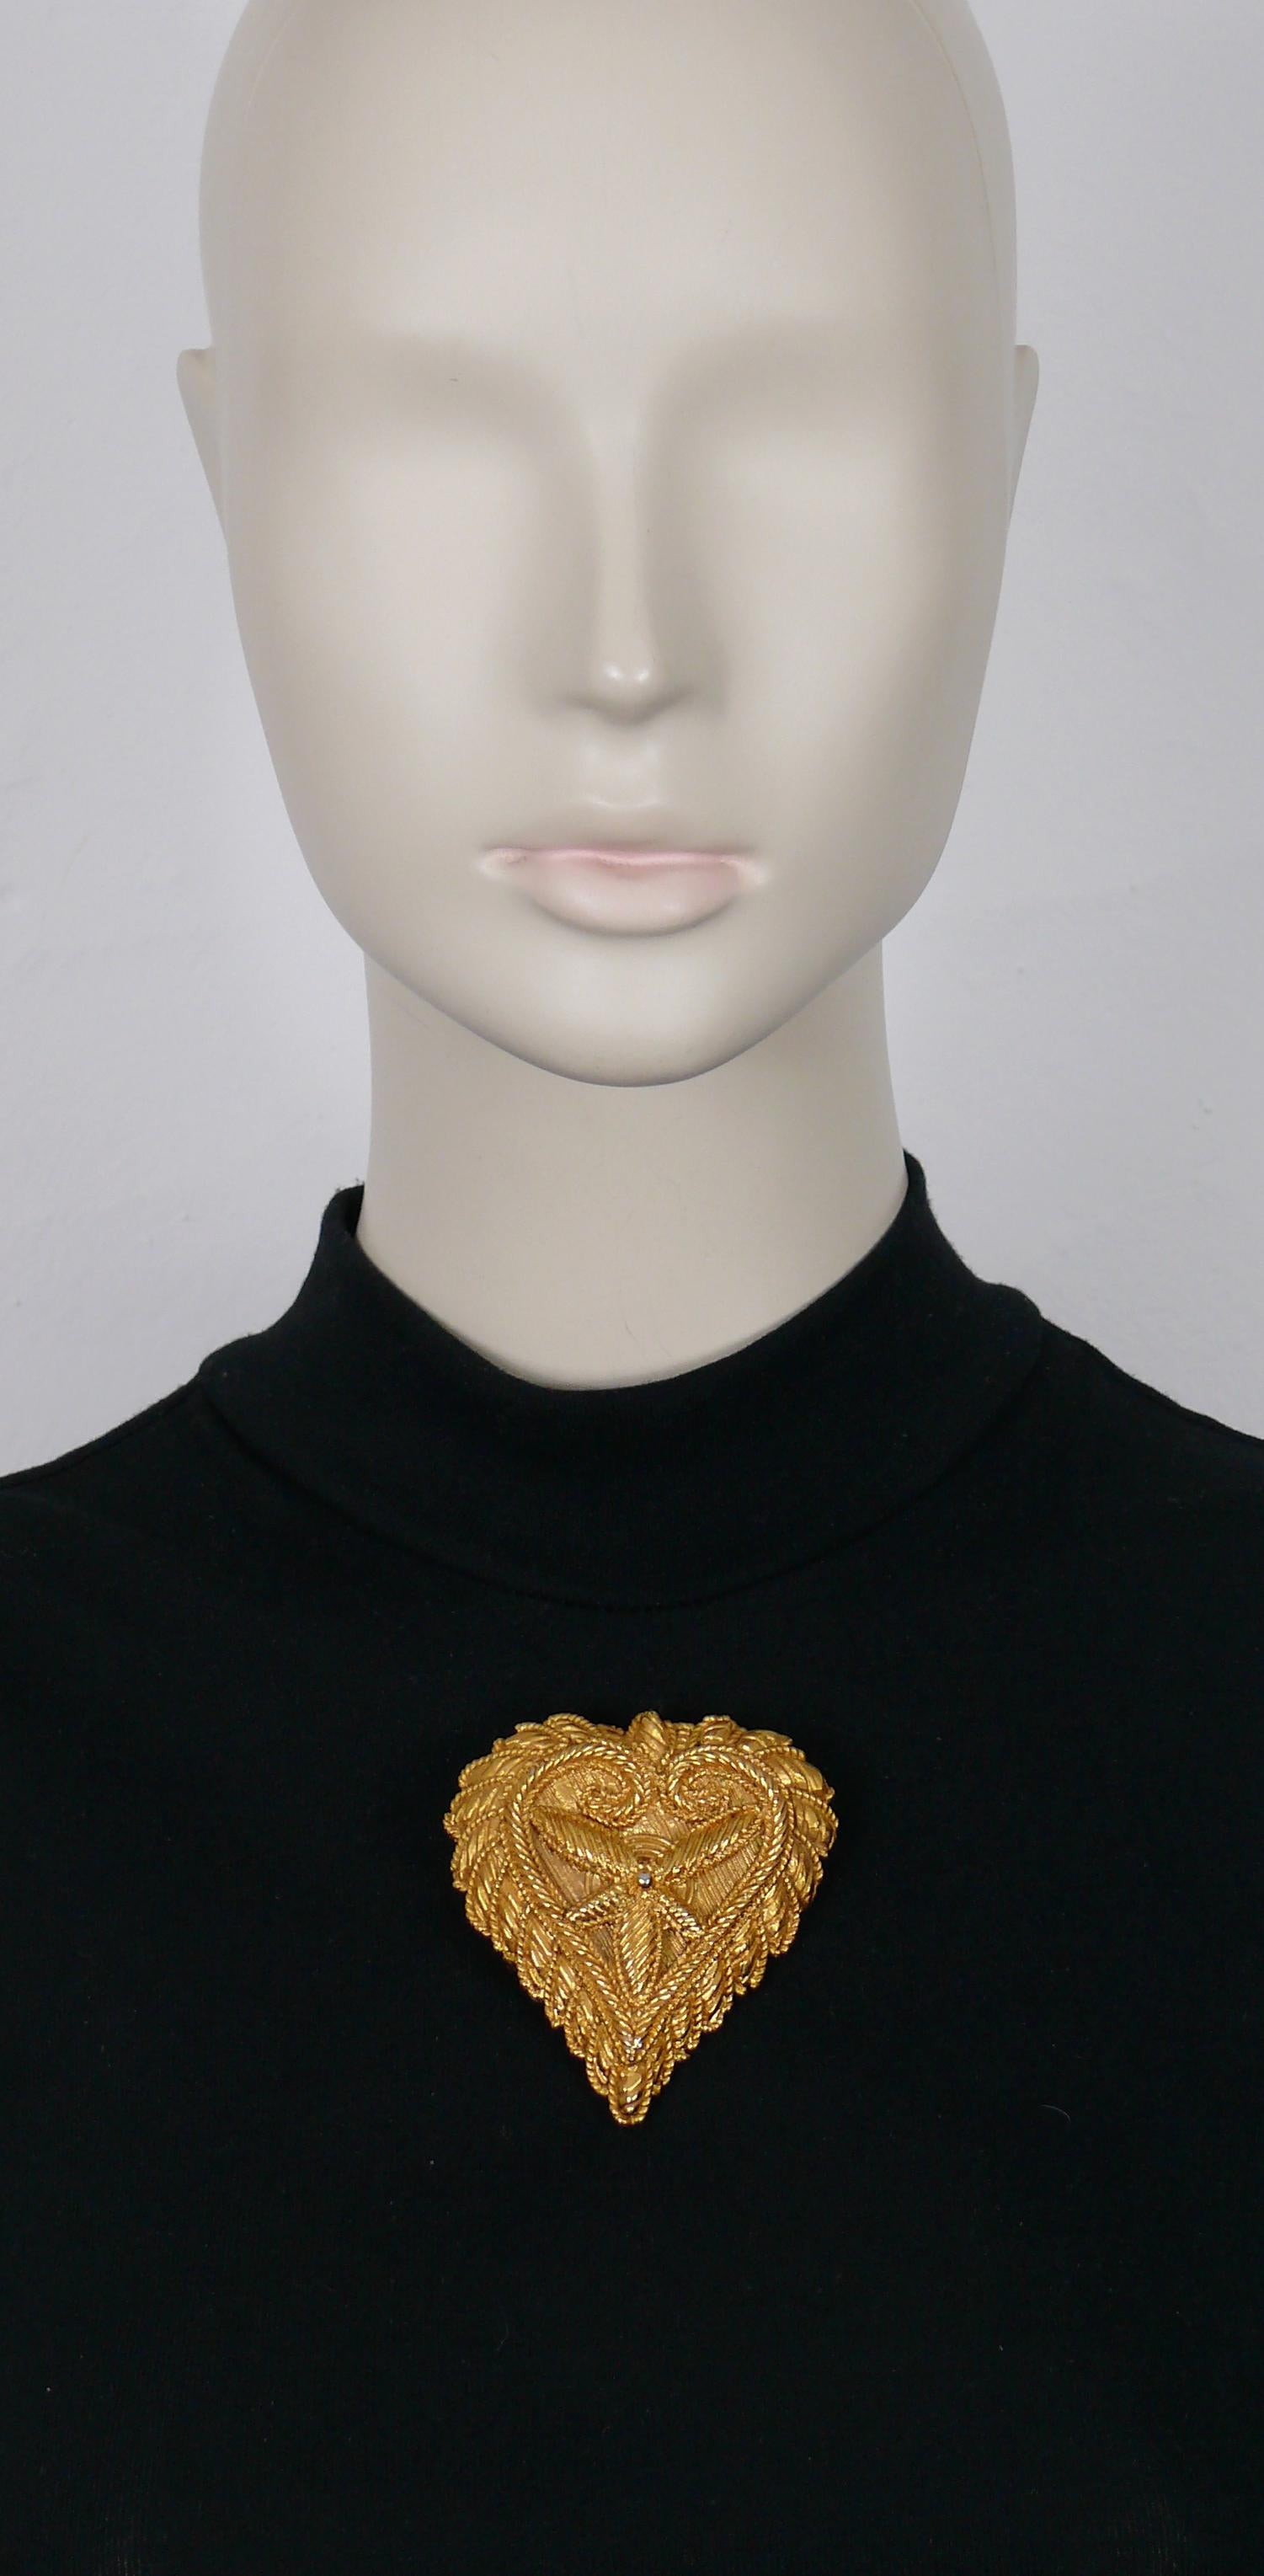 CHRISTIAN LACROIX vintage gold tone resin heart brooch featuring a lace design.

Marked CHRISTIAN LACROIX CL Made in France.

Indicative measurements : max. height approx. 7 cm (2.76 inches) / max. width approx. 6.7 cm (2.64 inches).

Material :